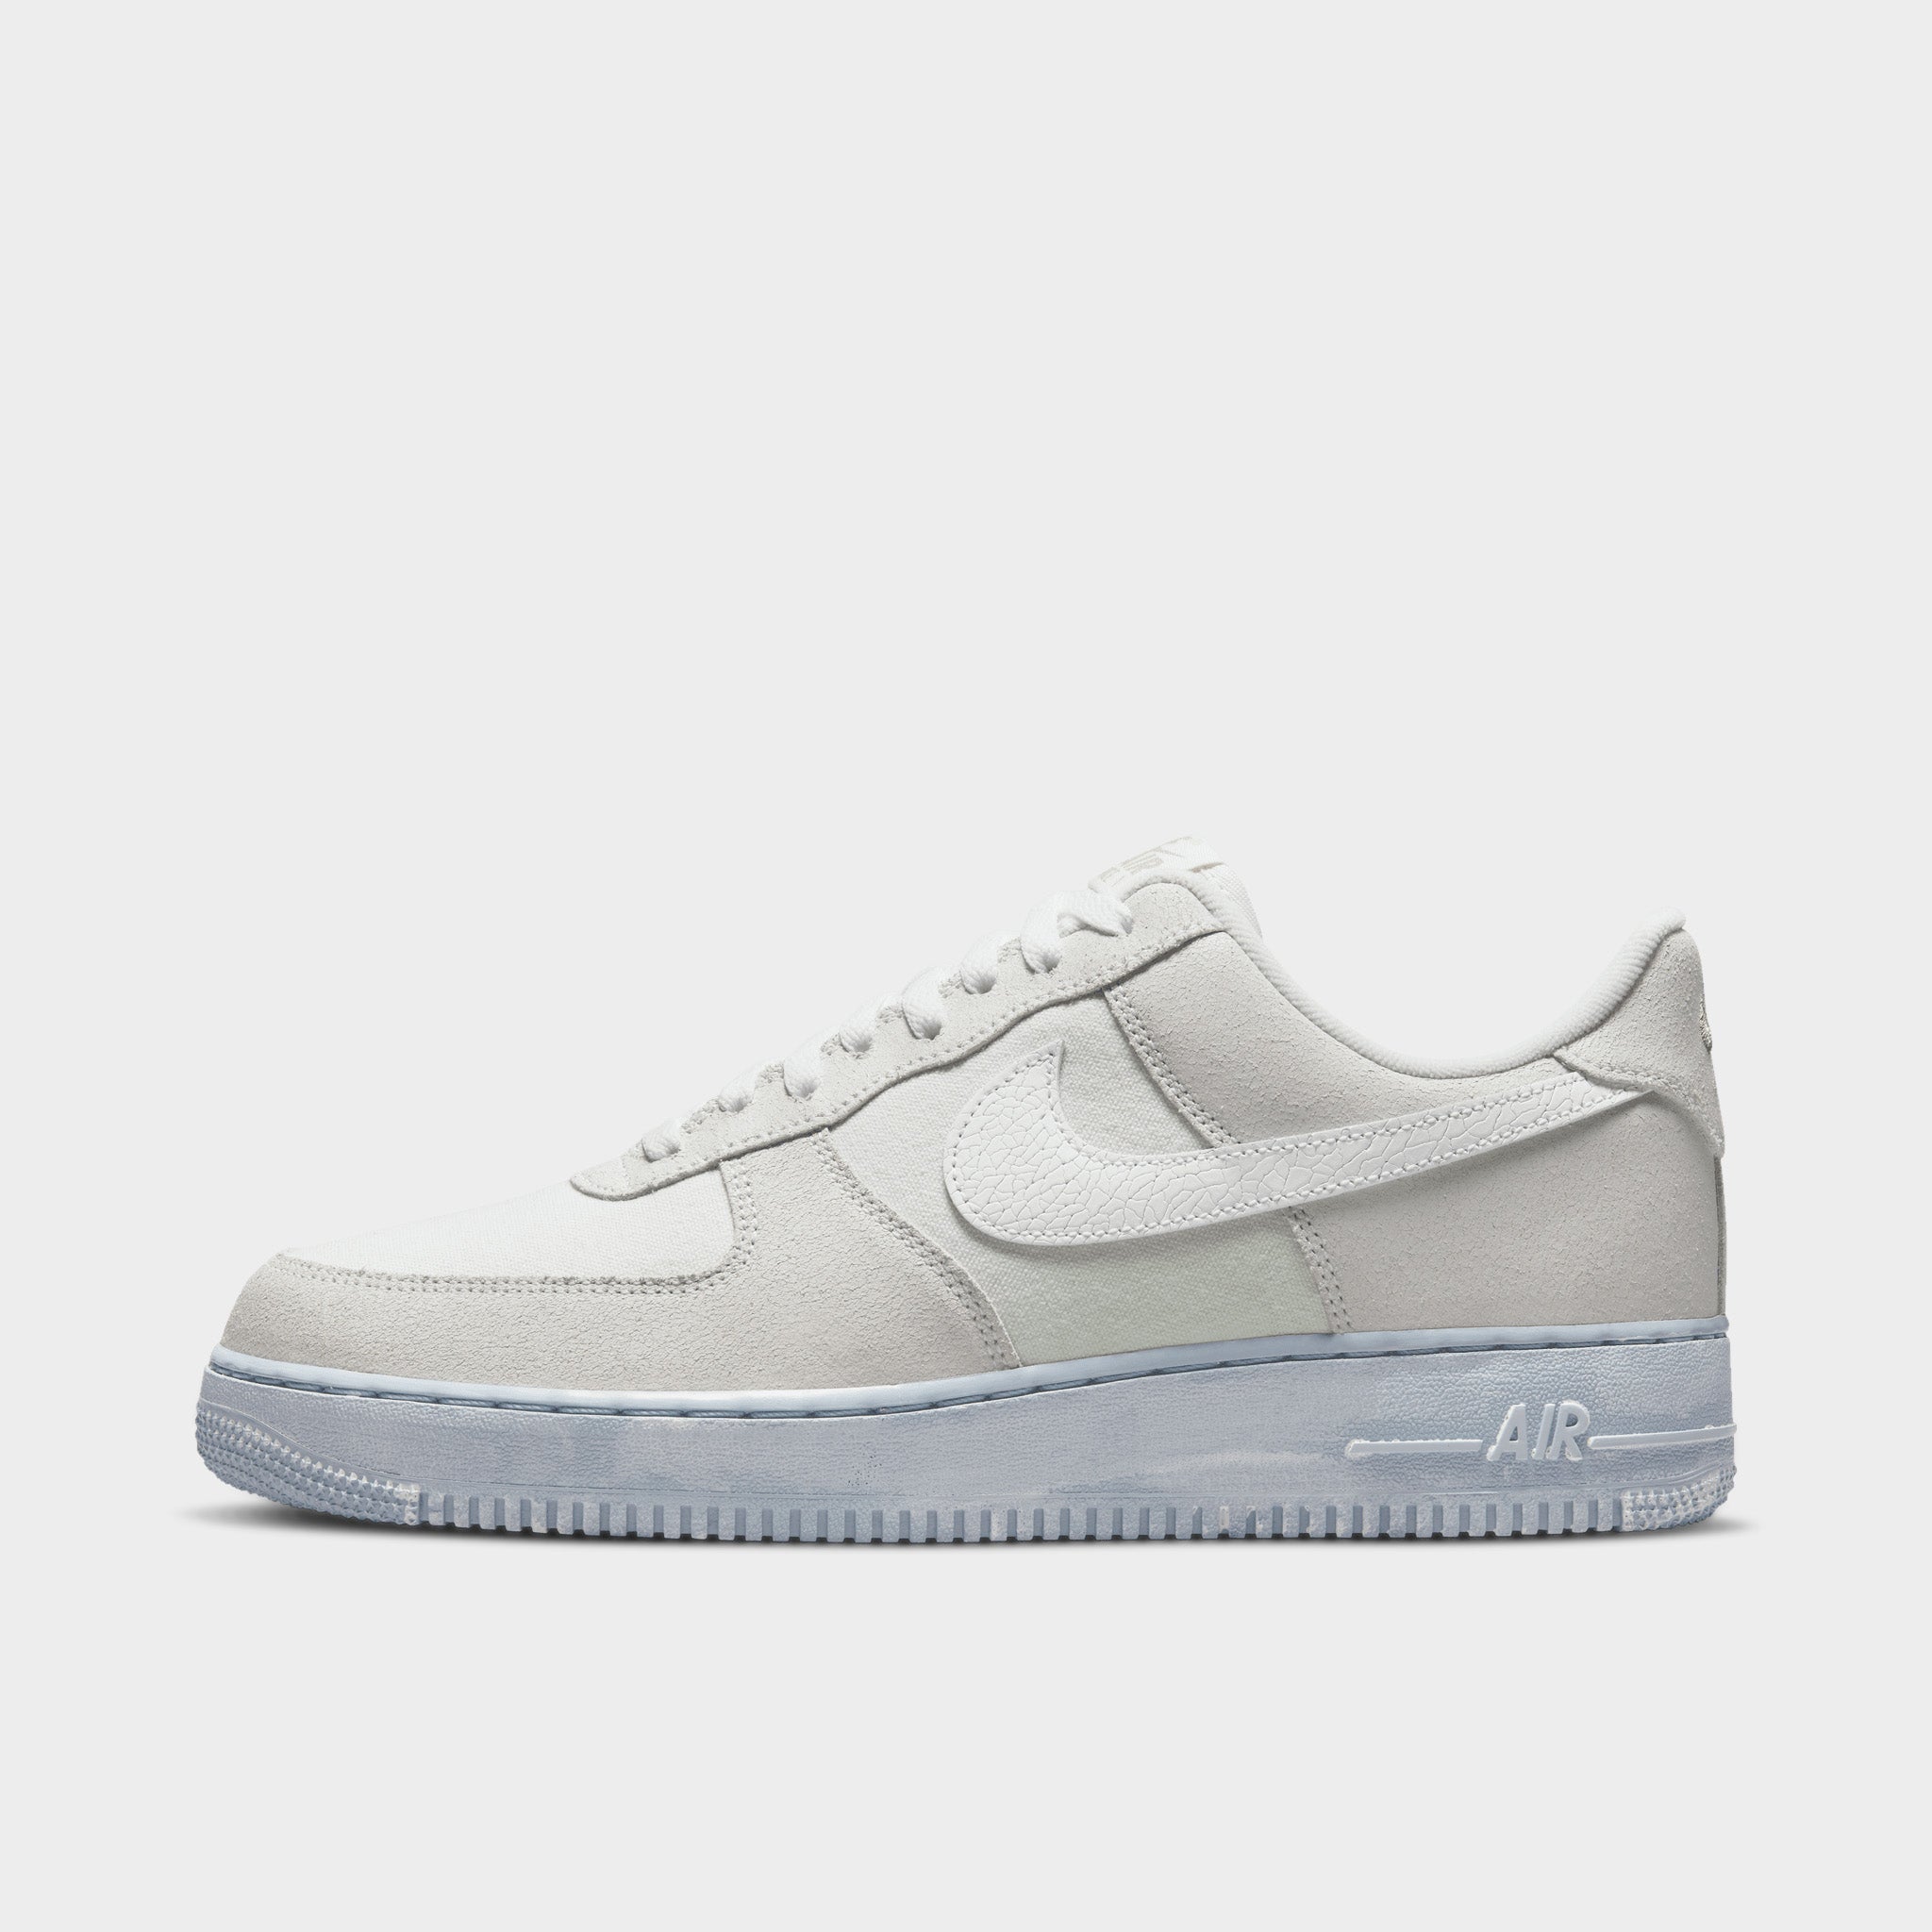 Nike Air Force 1 LV8 'Sail Medium Blue' Double Swoosh Youth/Women  Size 8,8.5